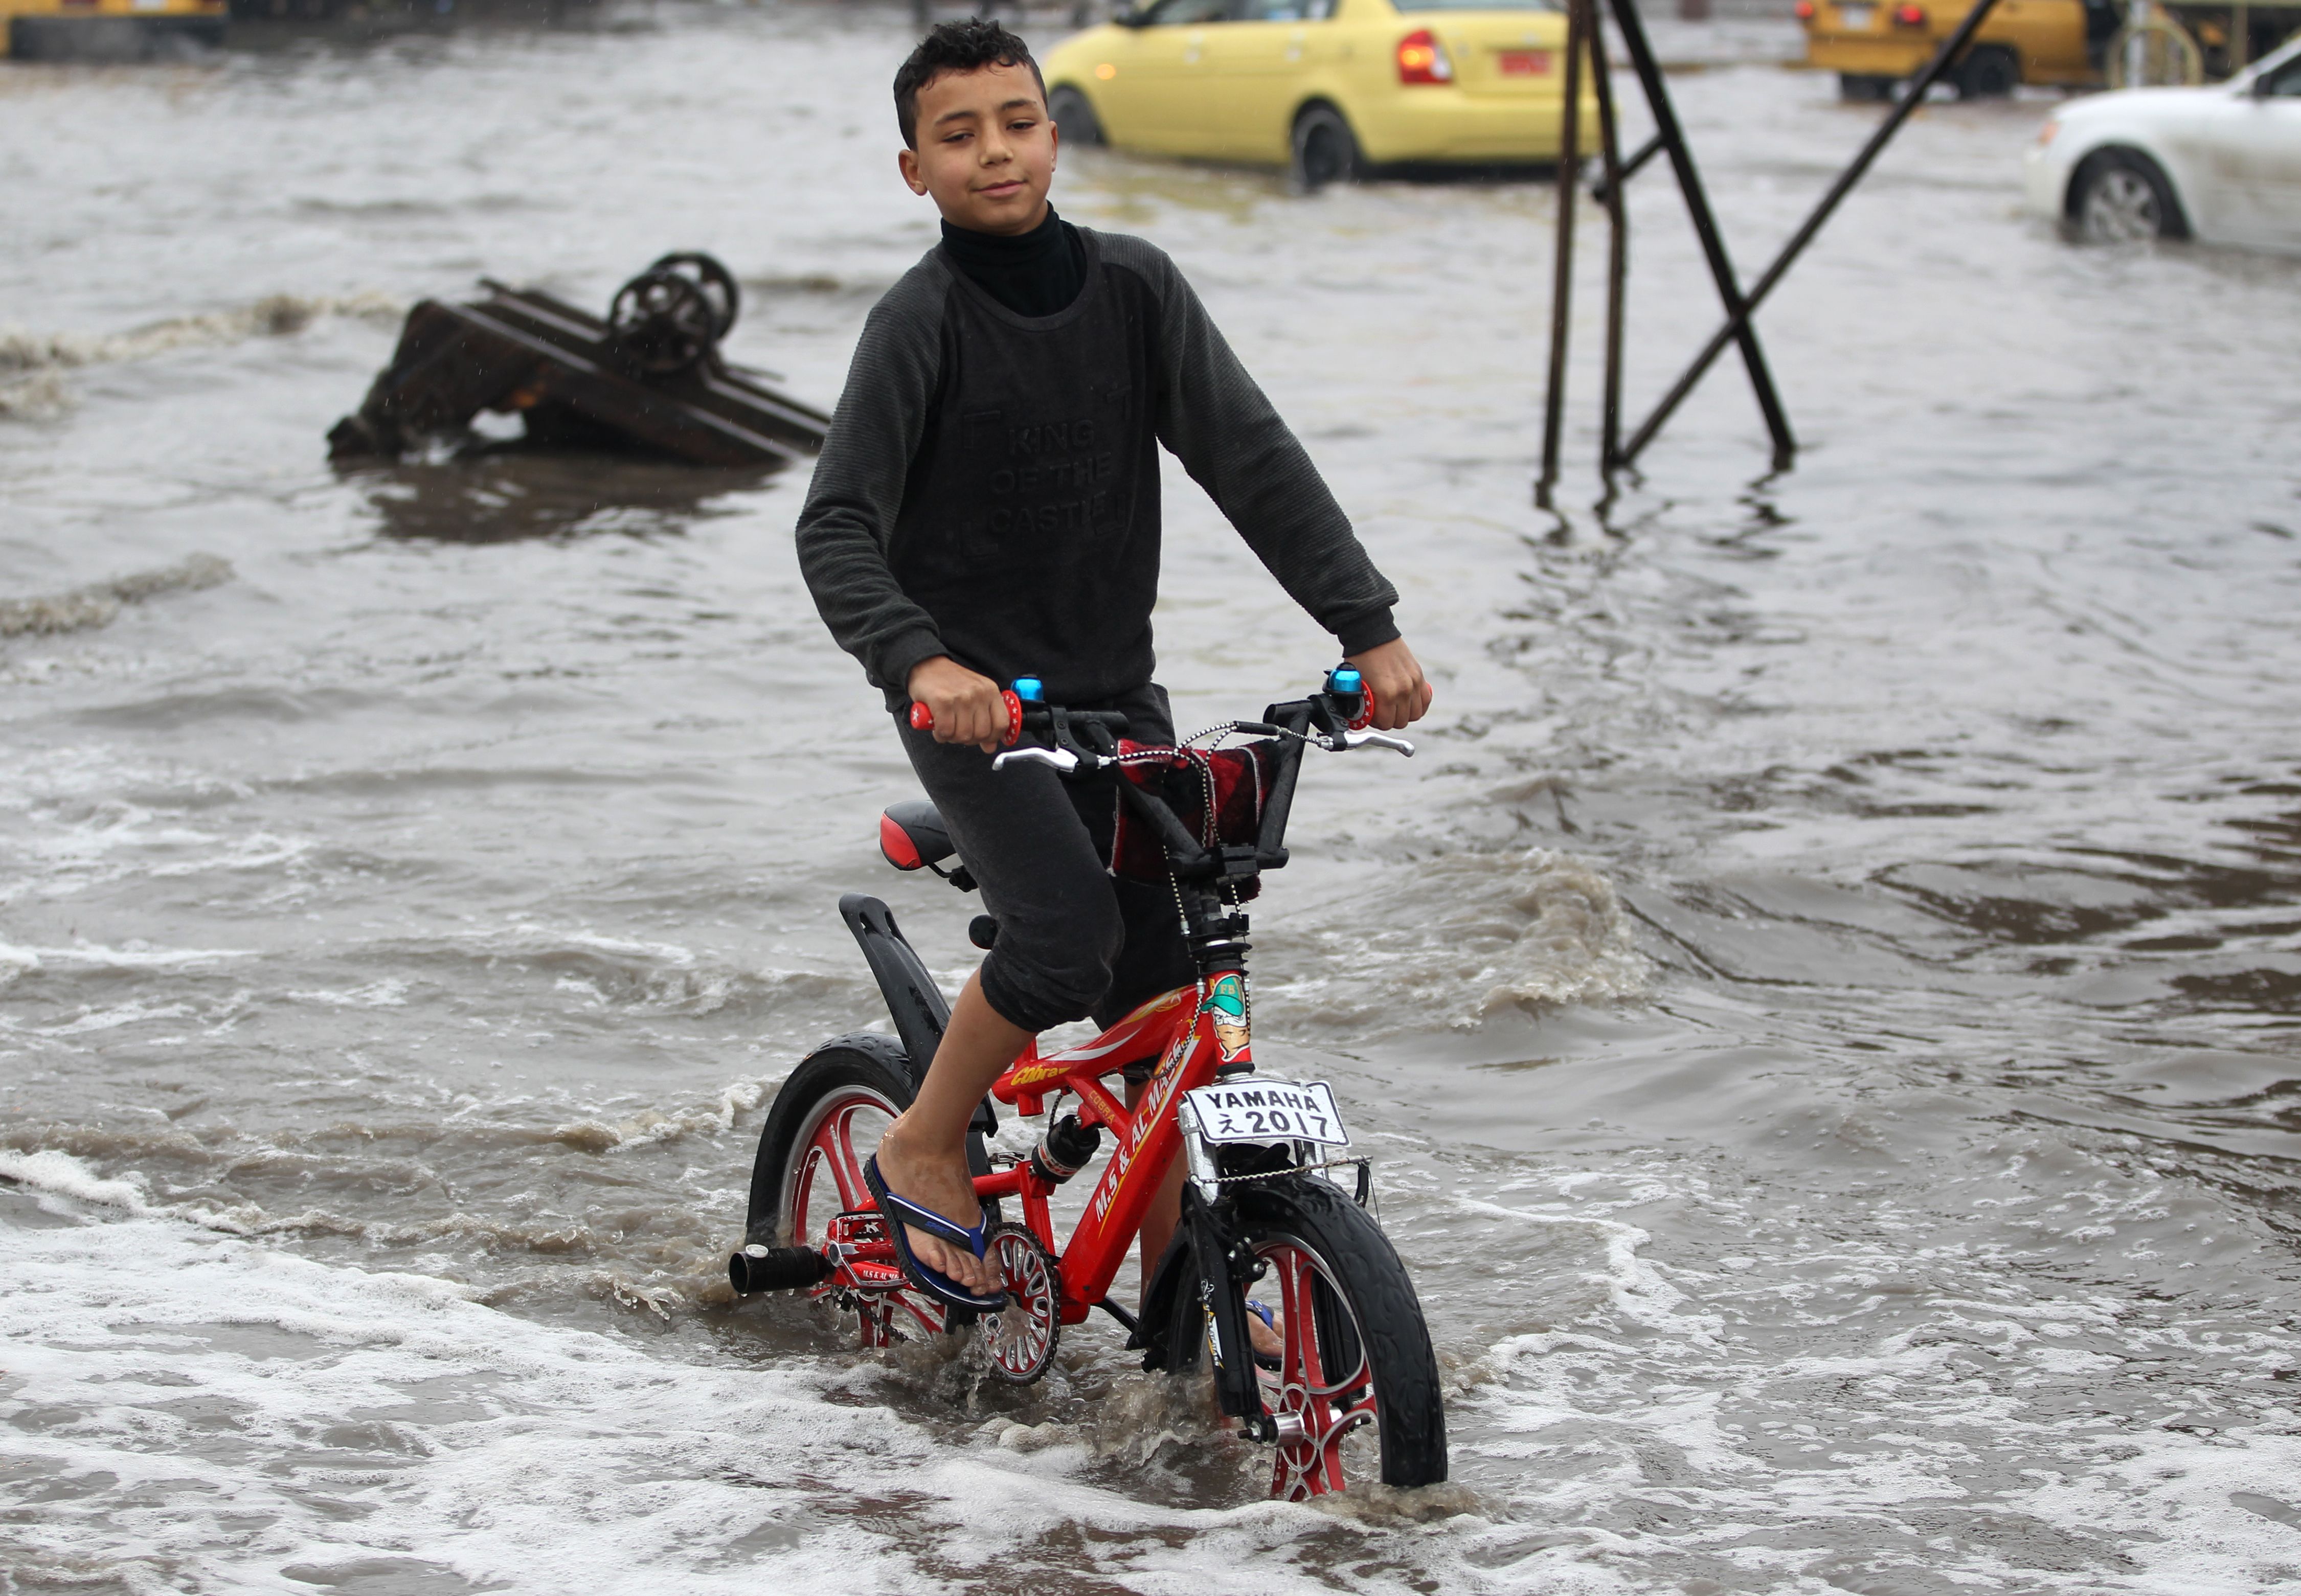 One of the children is playing with his bicycle in the middle of the water